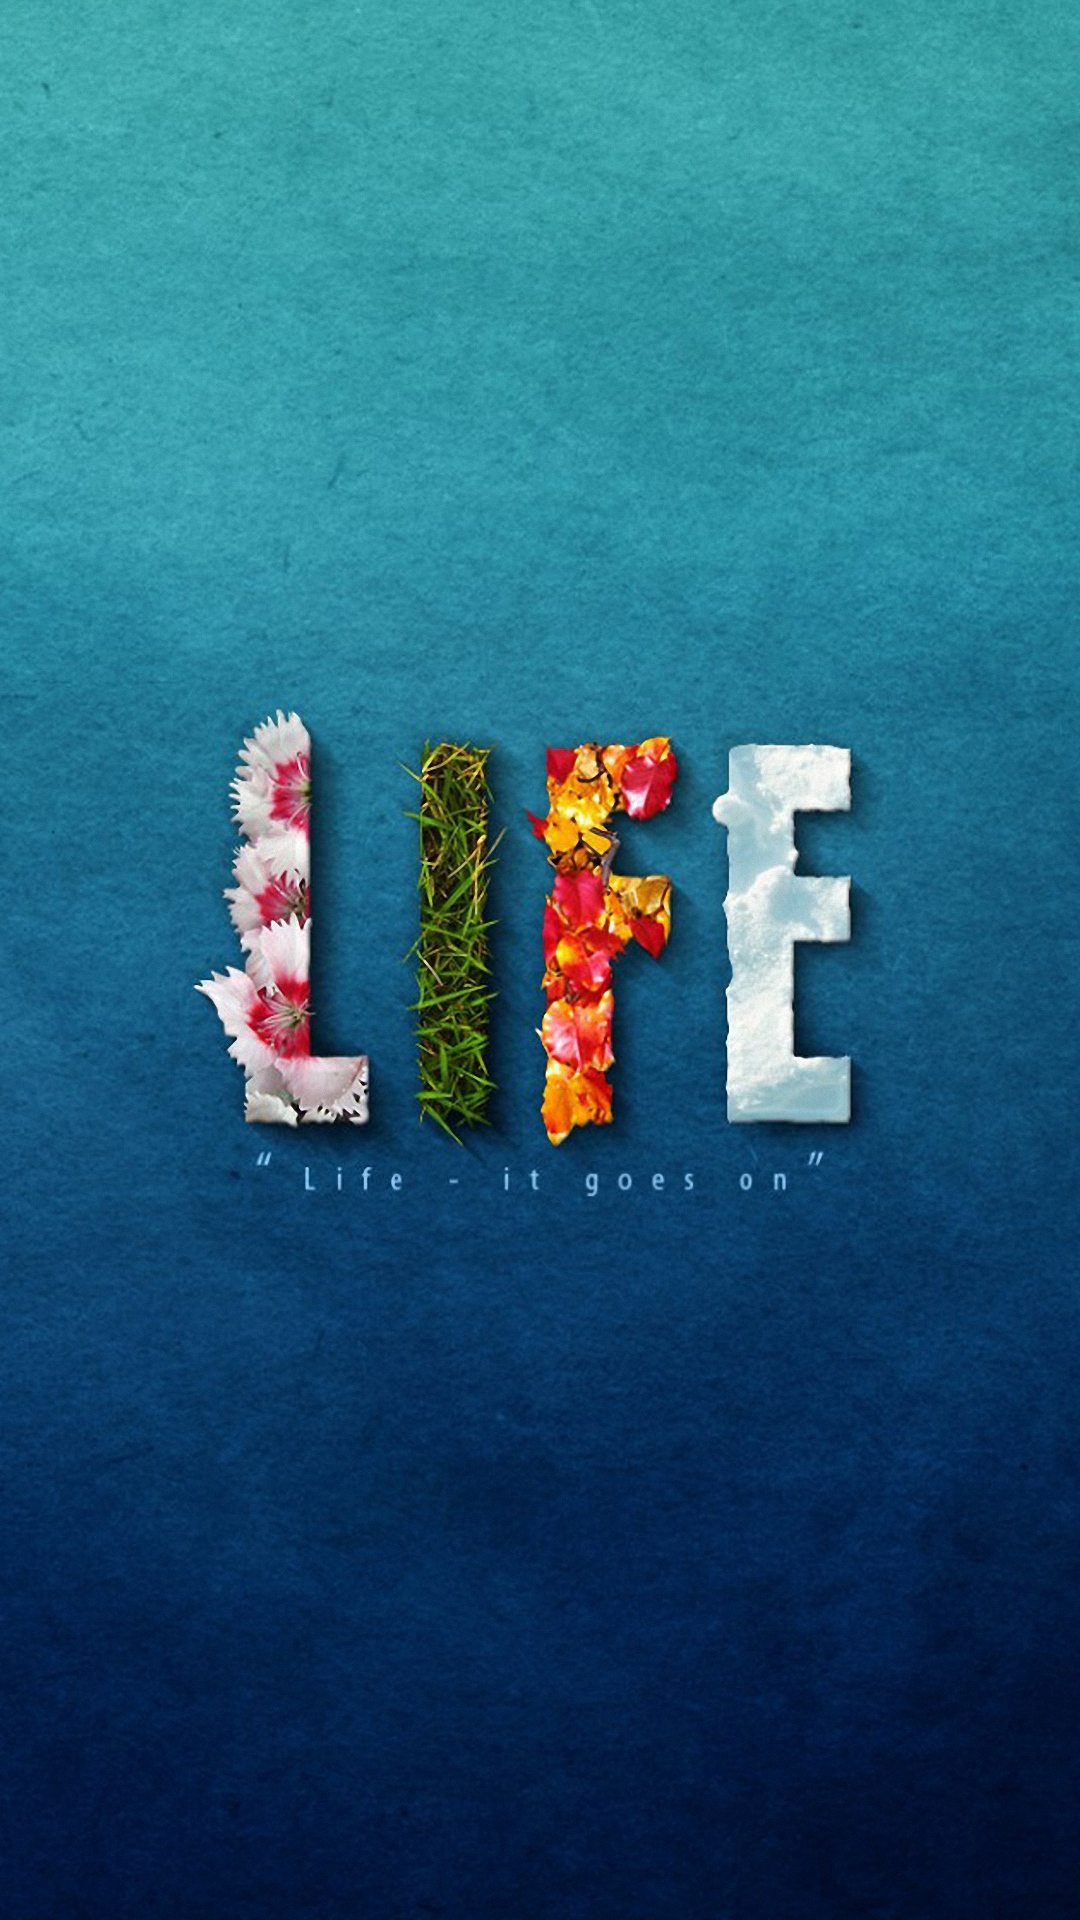 Hd Colorful Design Mobile Phone Wallpapers - Facebook Cover Photos Quotes  On Life - 1080x1920 Wallpaper 